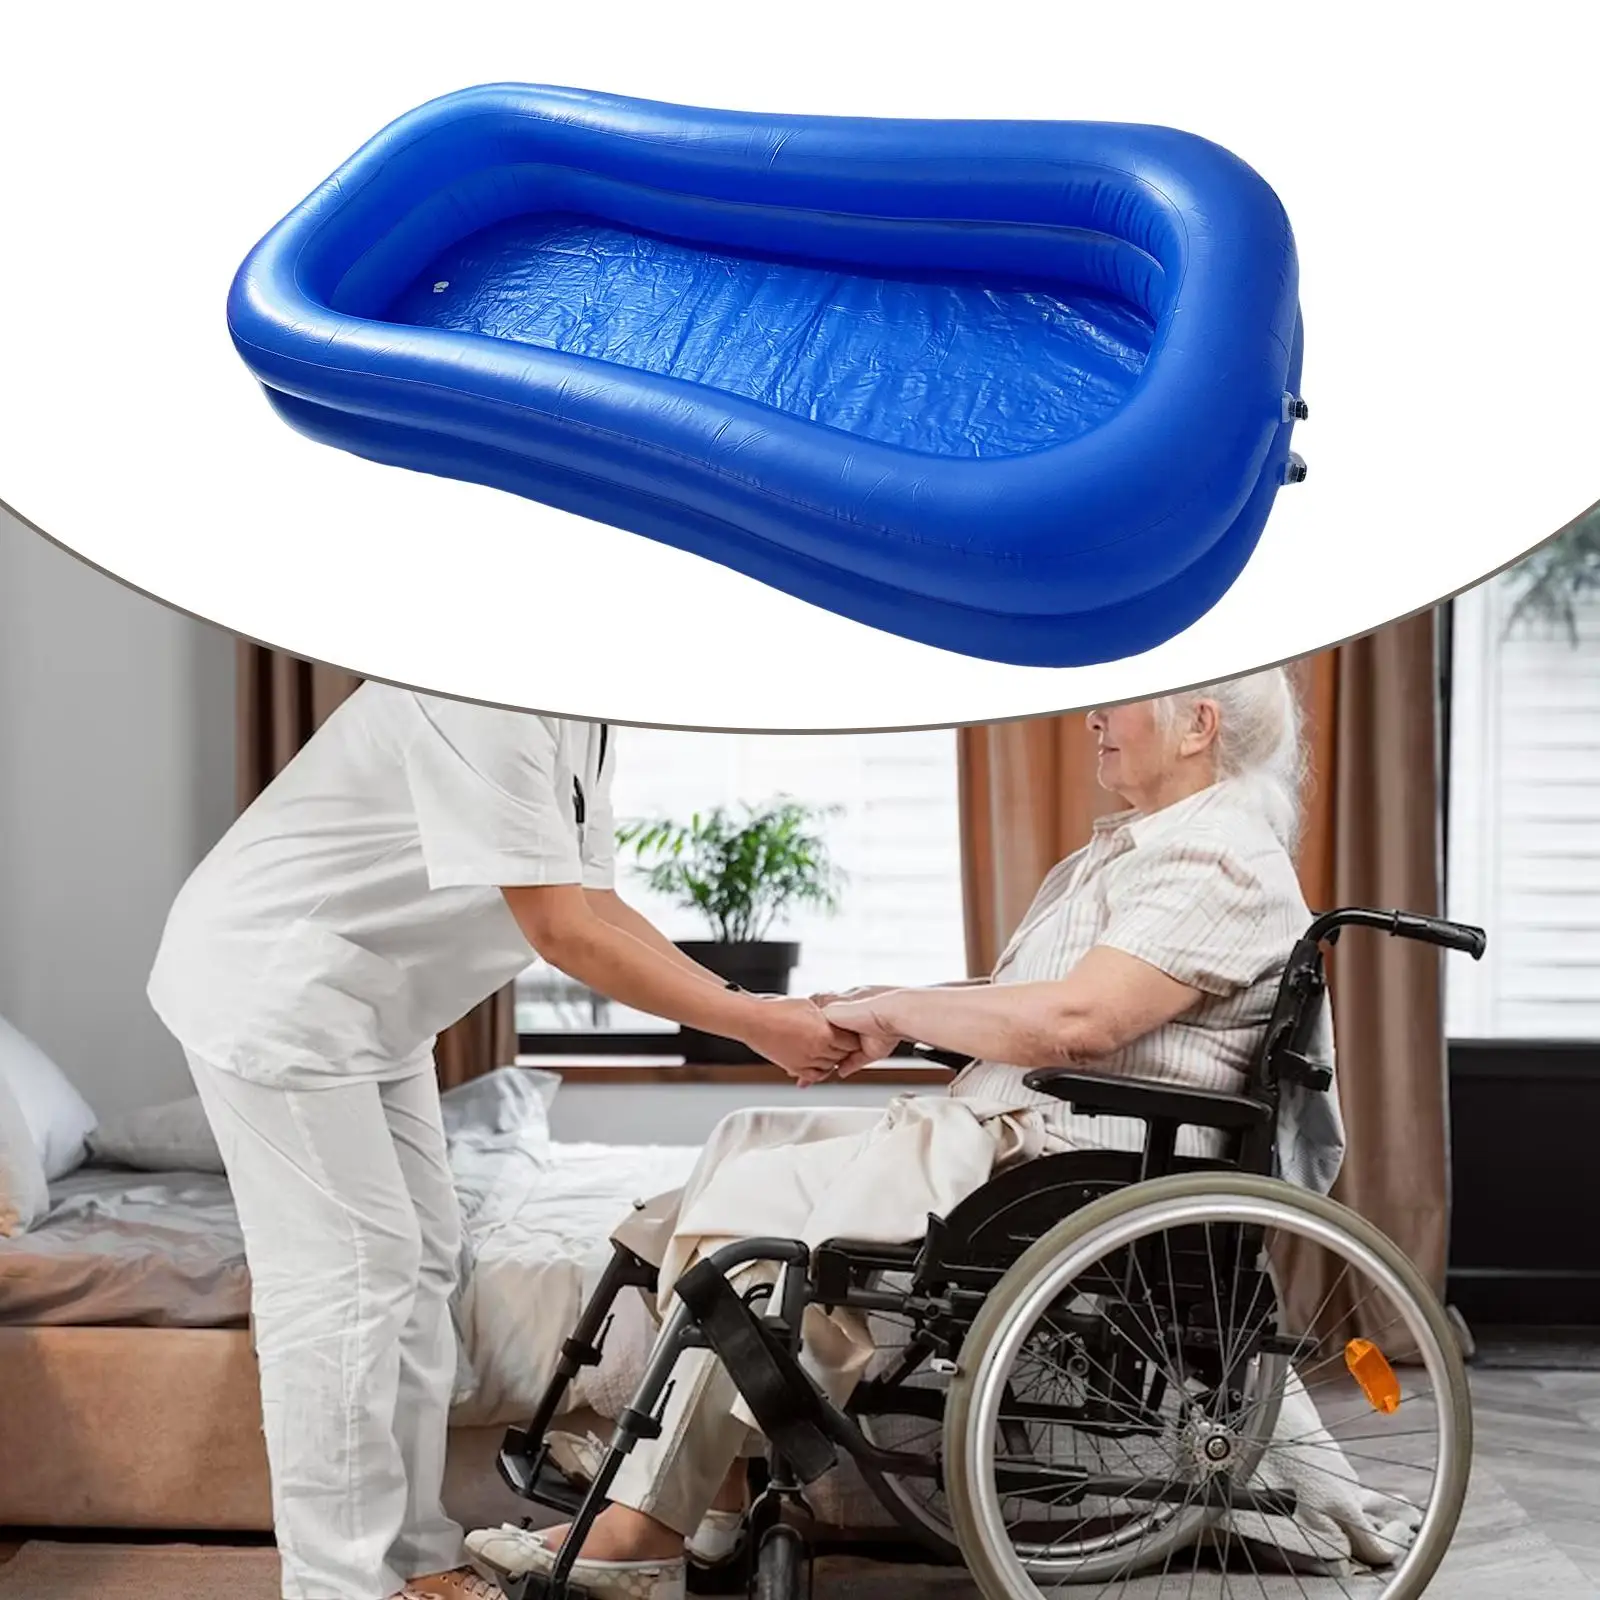 Inflatable Bathtub Body Washing Basin System for Handicapped Adults Elderly